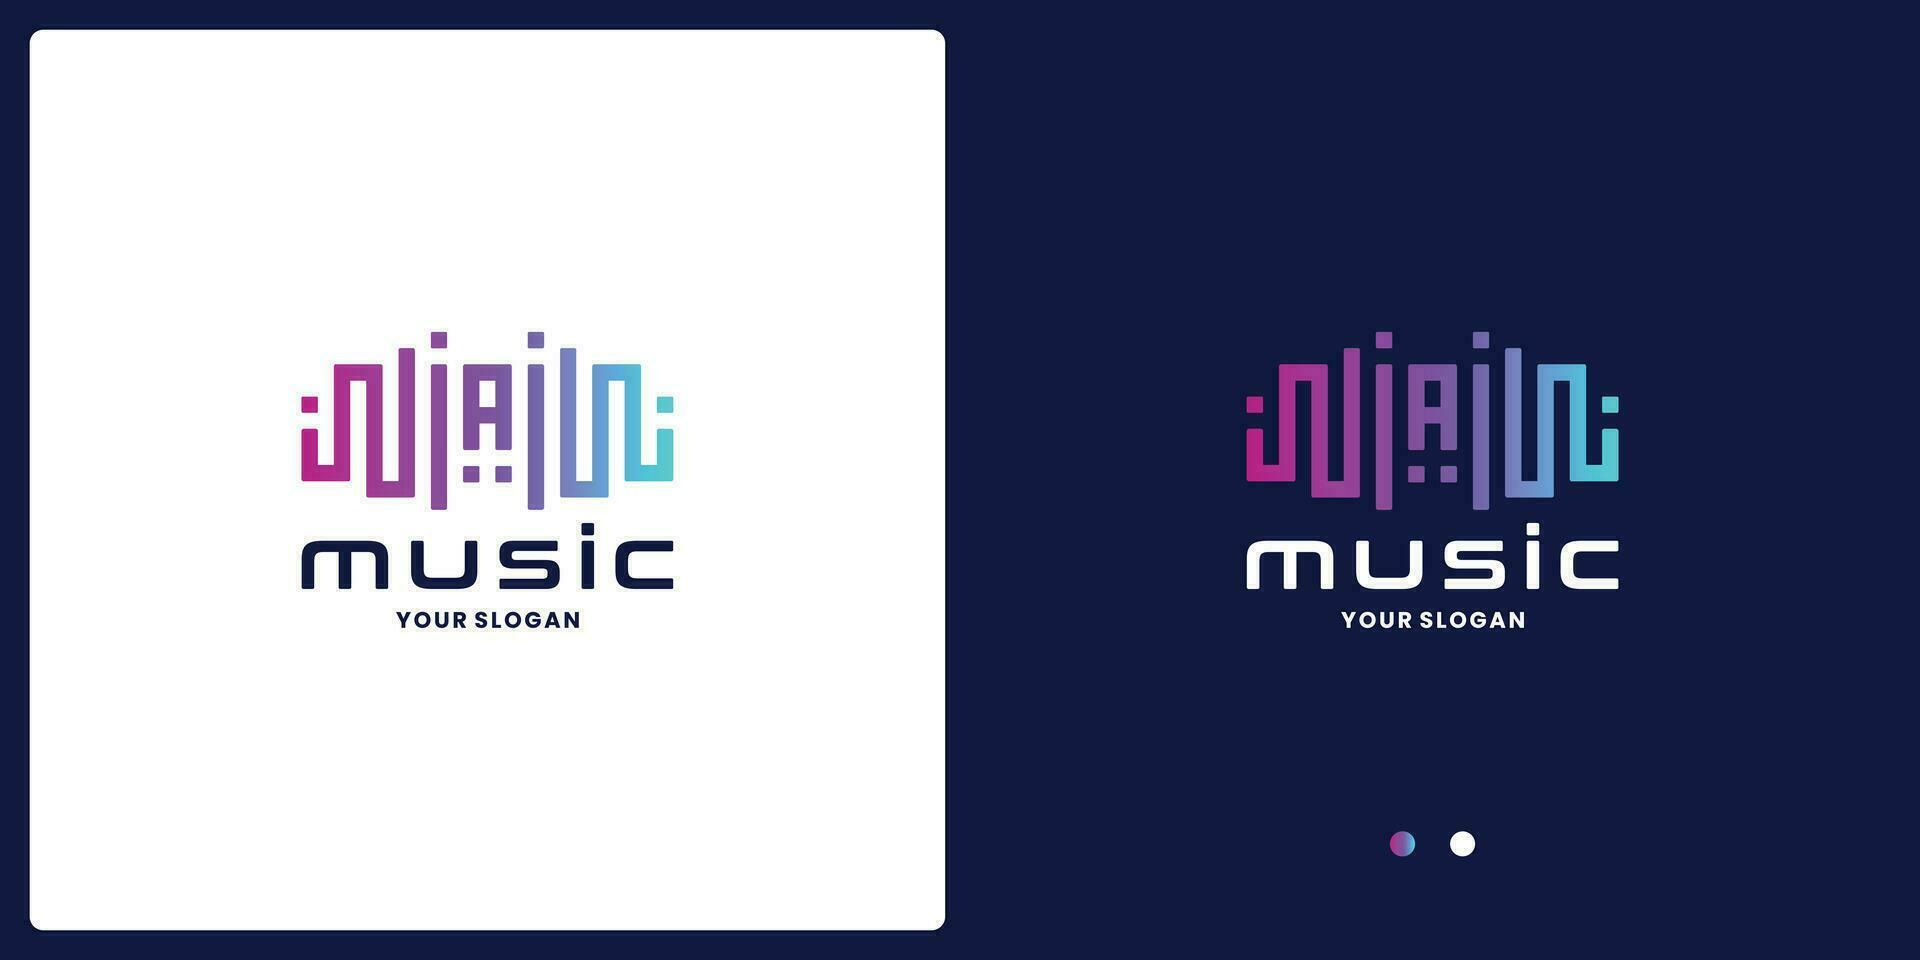 Pulse music player logo element with letter A logo design vector